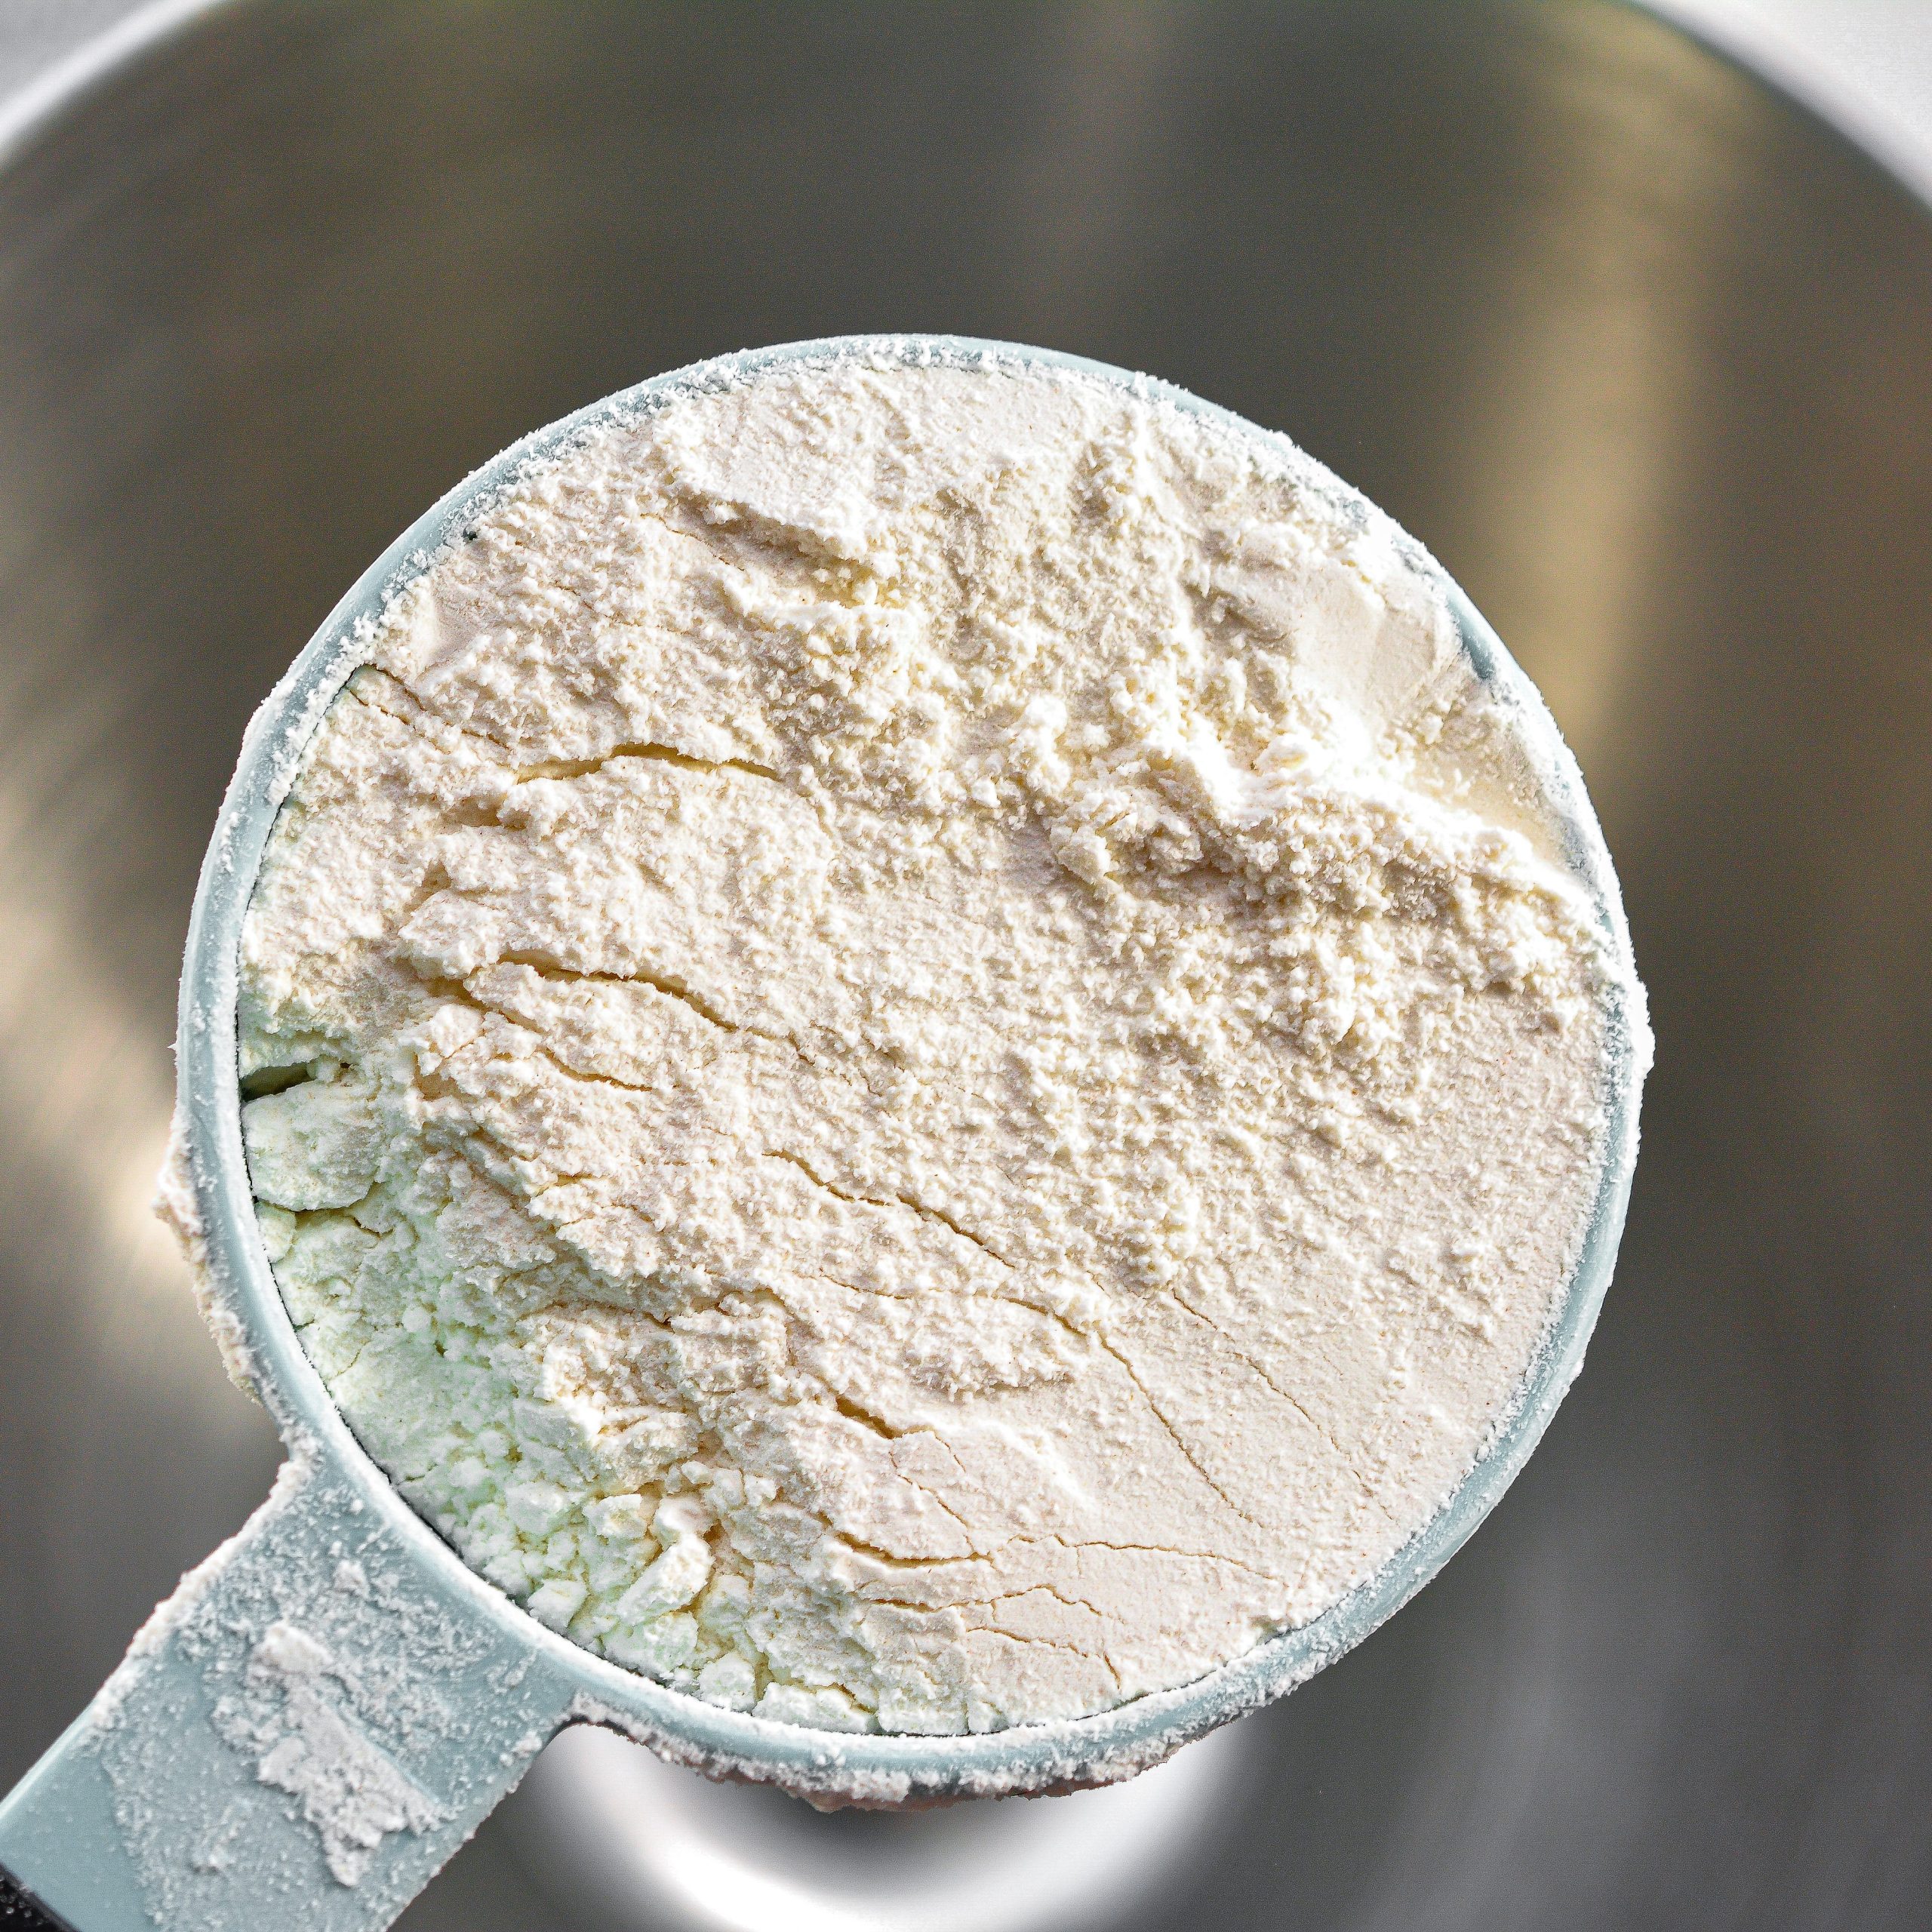 In a mixing bowl, combine 1c flour.